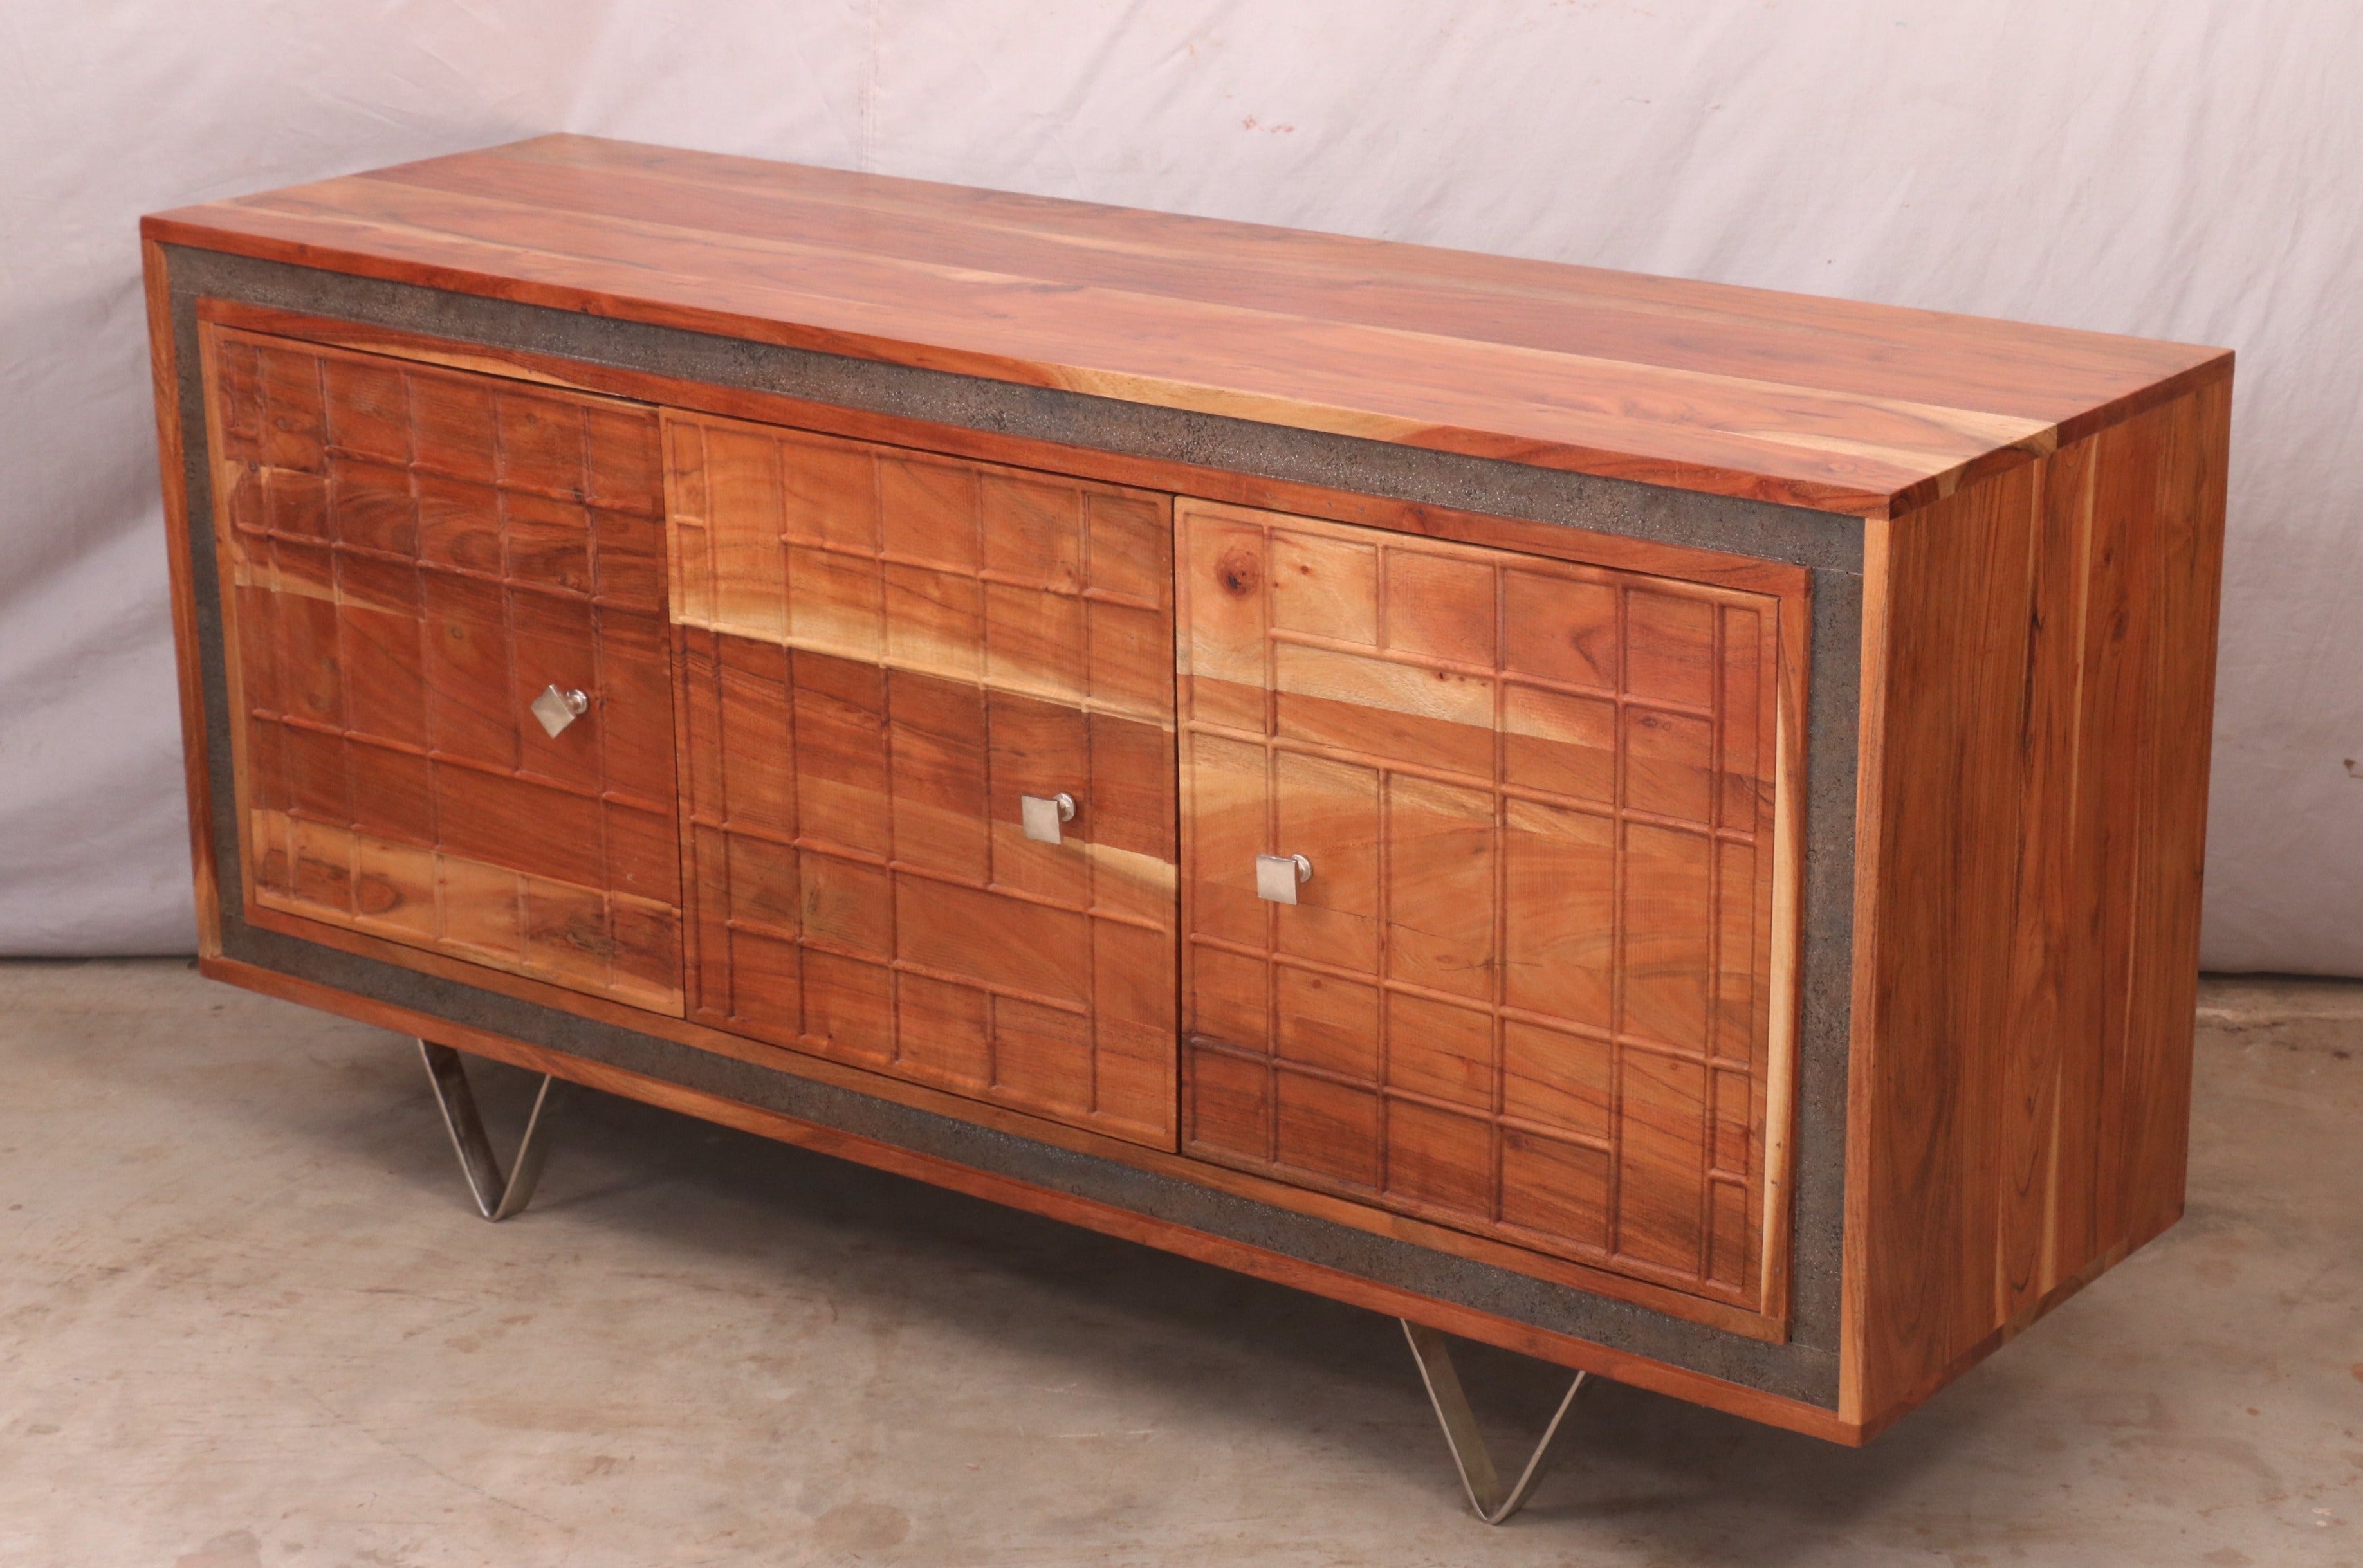 Solid Wood & Iron Sideboard and Cabinets Tv stand